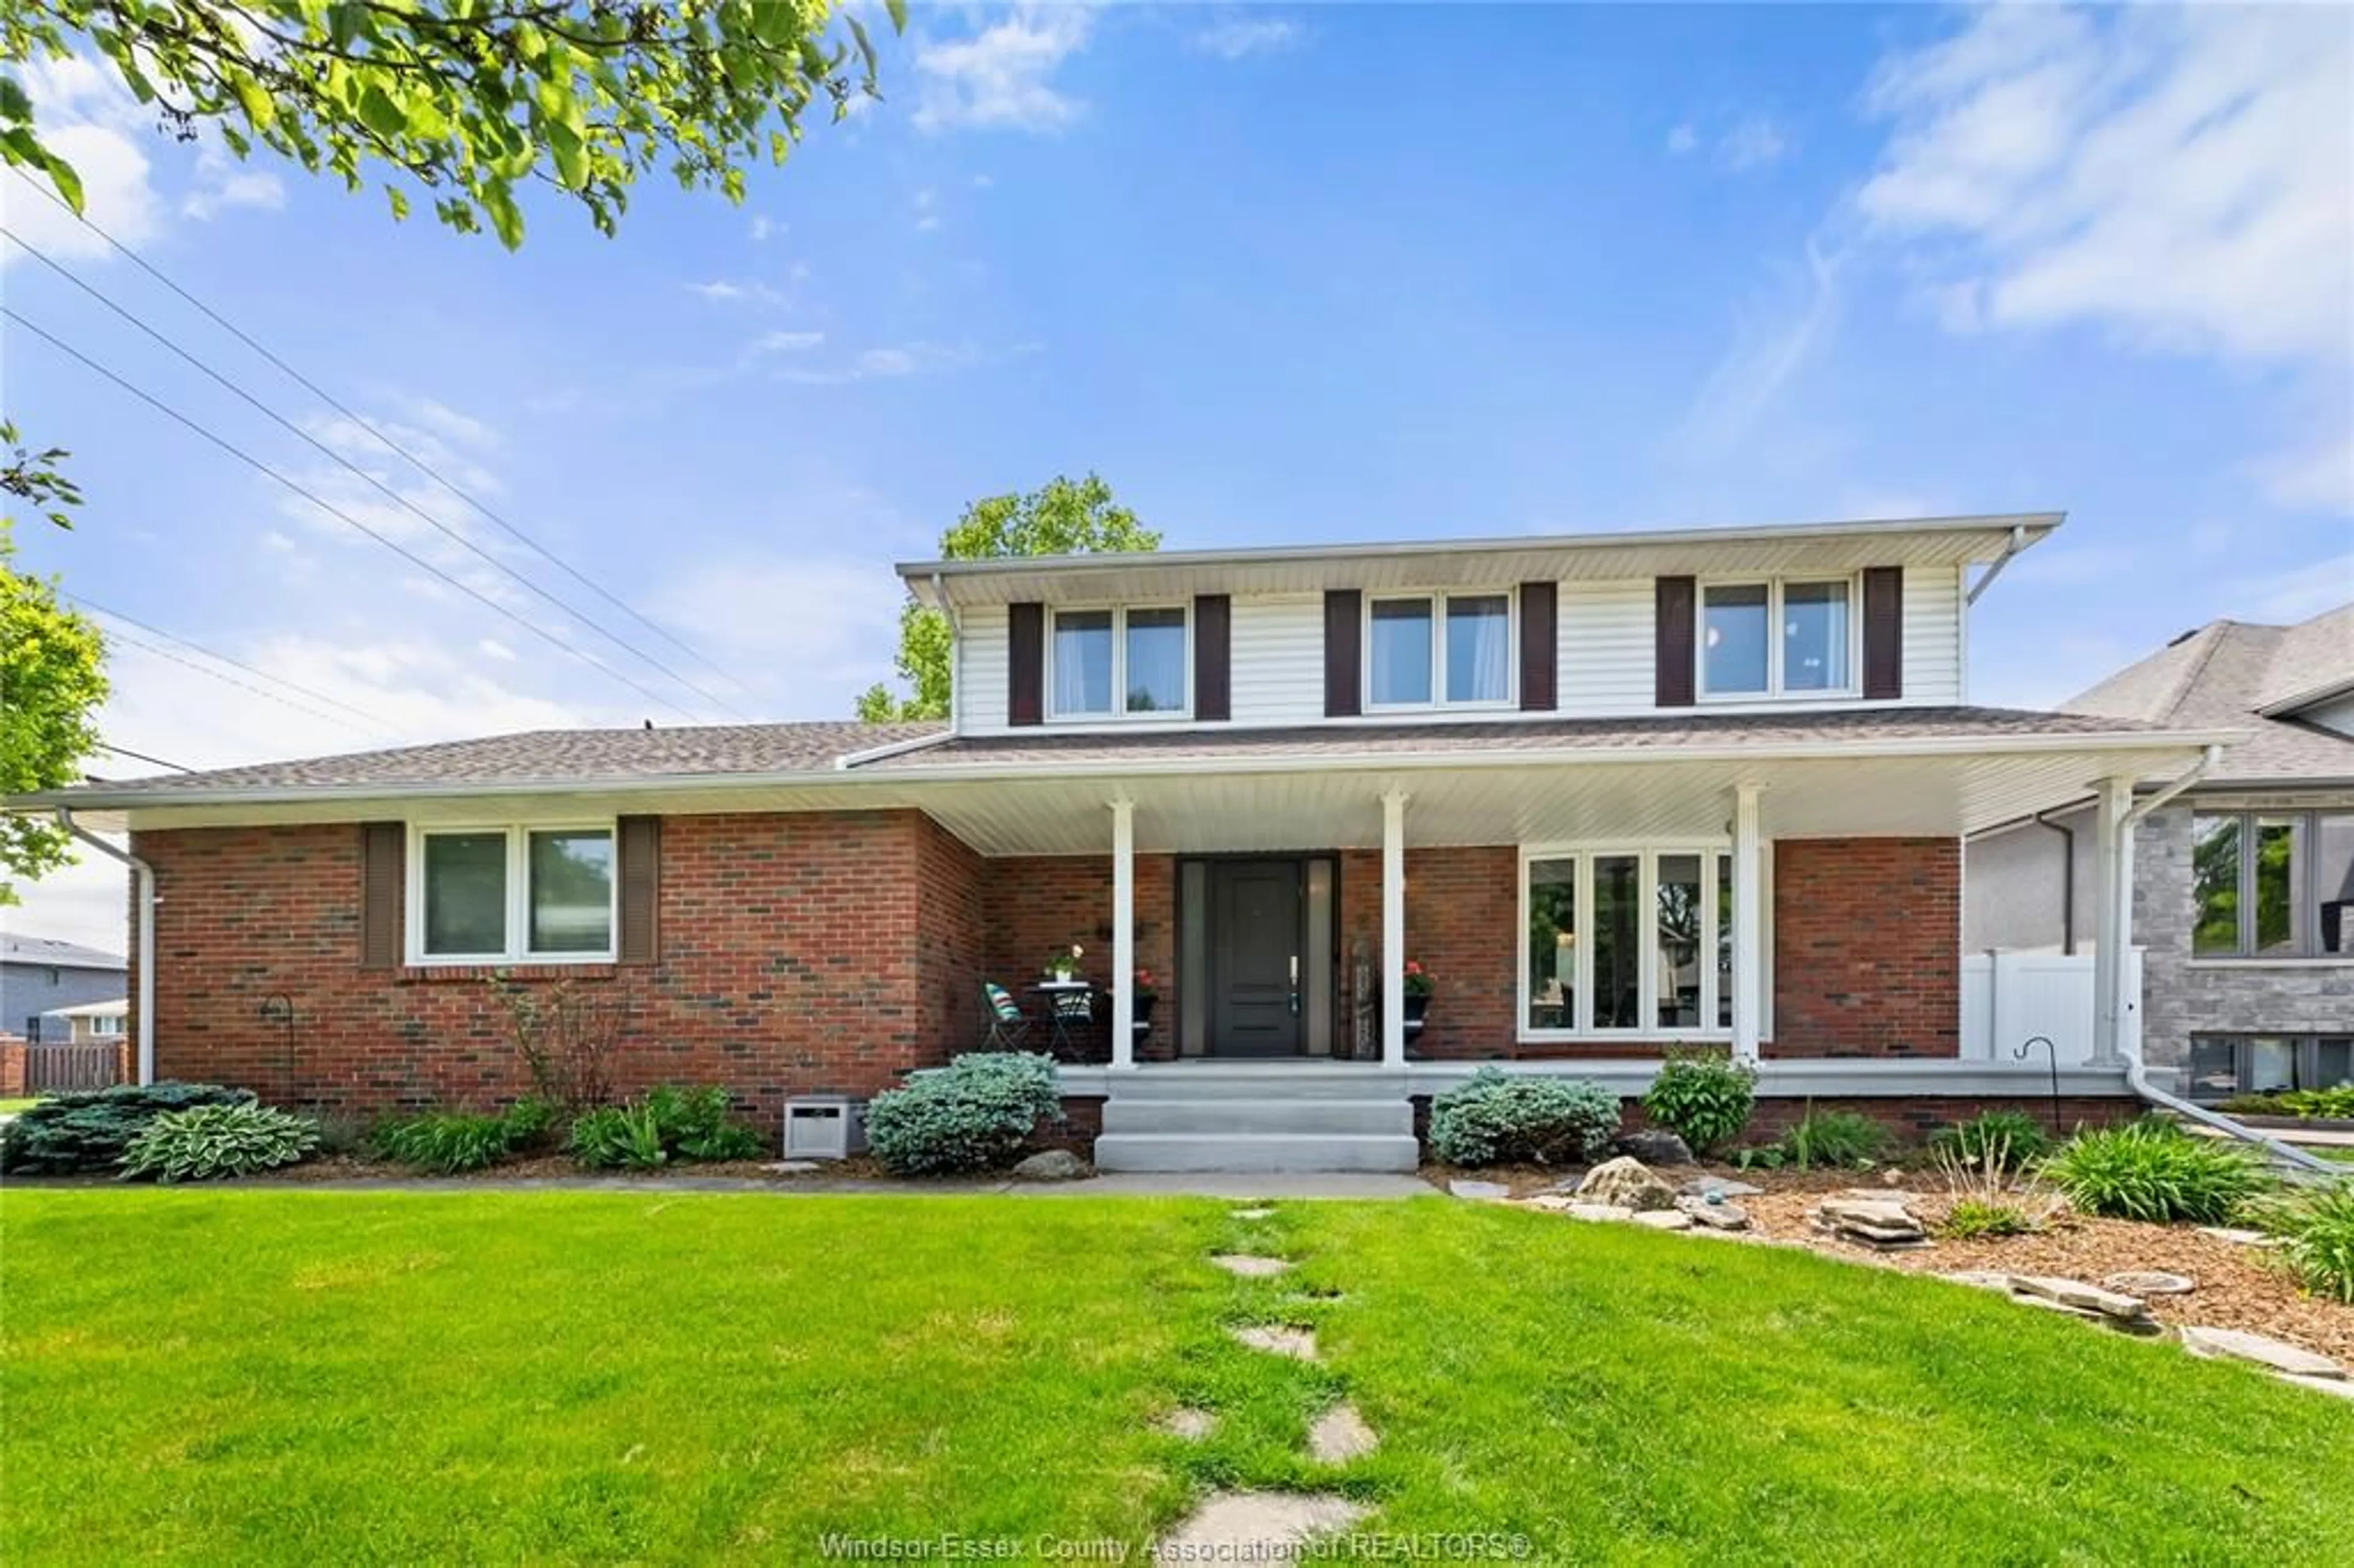 Home with brick exterior material for 2395 GLENWOOD AVE, Windsor Ontario N9E 3X7